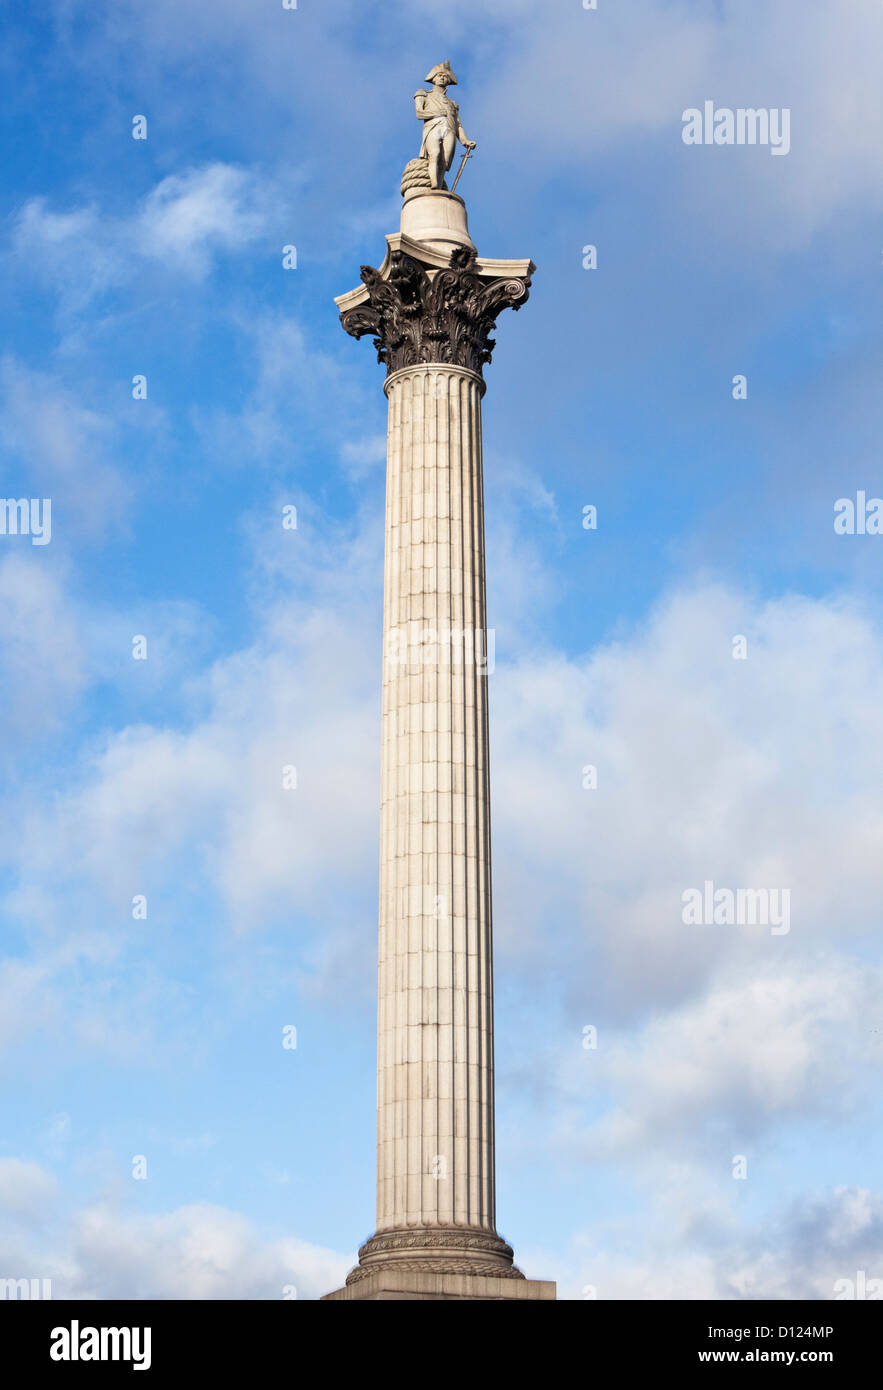 Nelson's Column with the sandstone statue of Lord Horatio Nelson, Trafalgar Square, London, England, UK Stock Photo